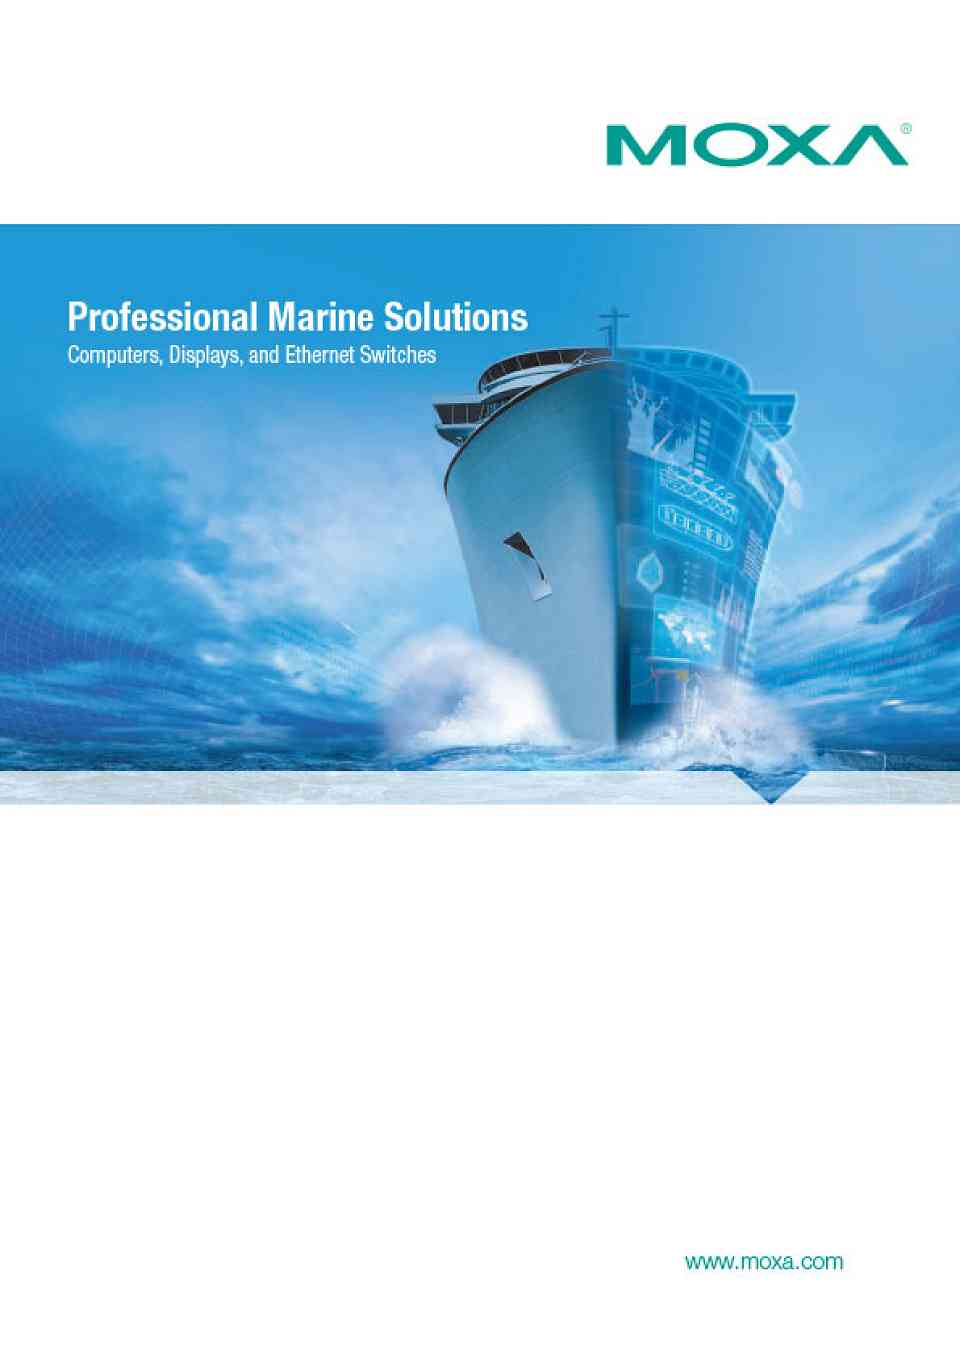 Professional Marine Solutions Catalogue Cover